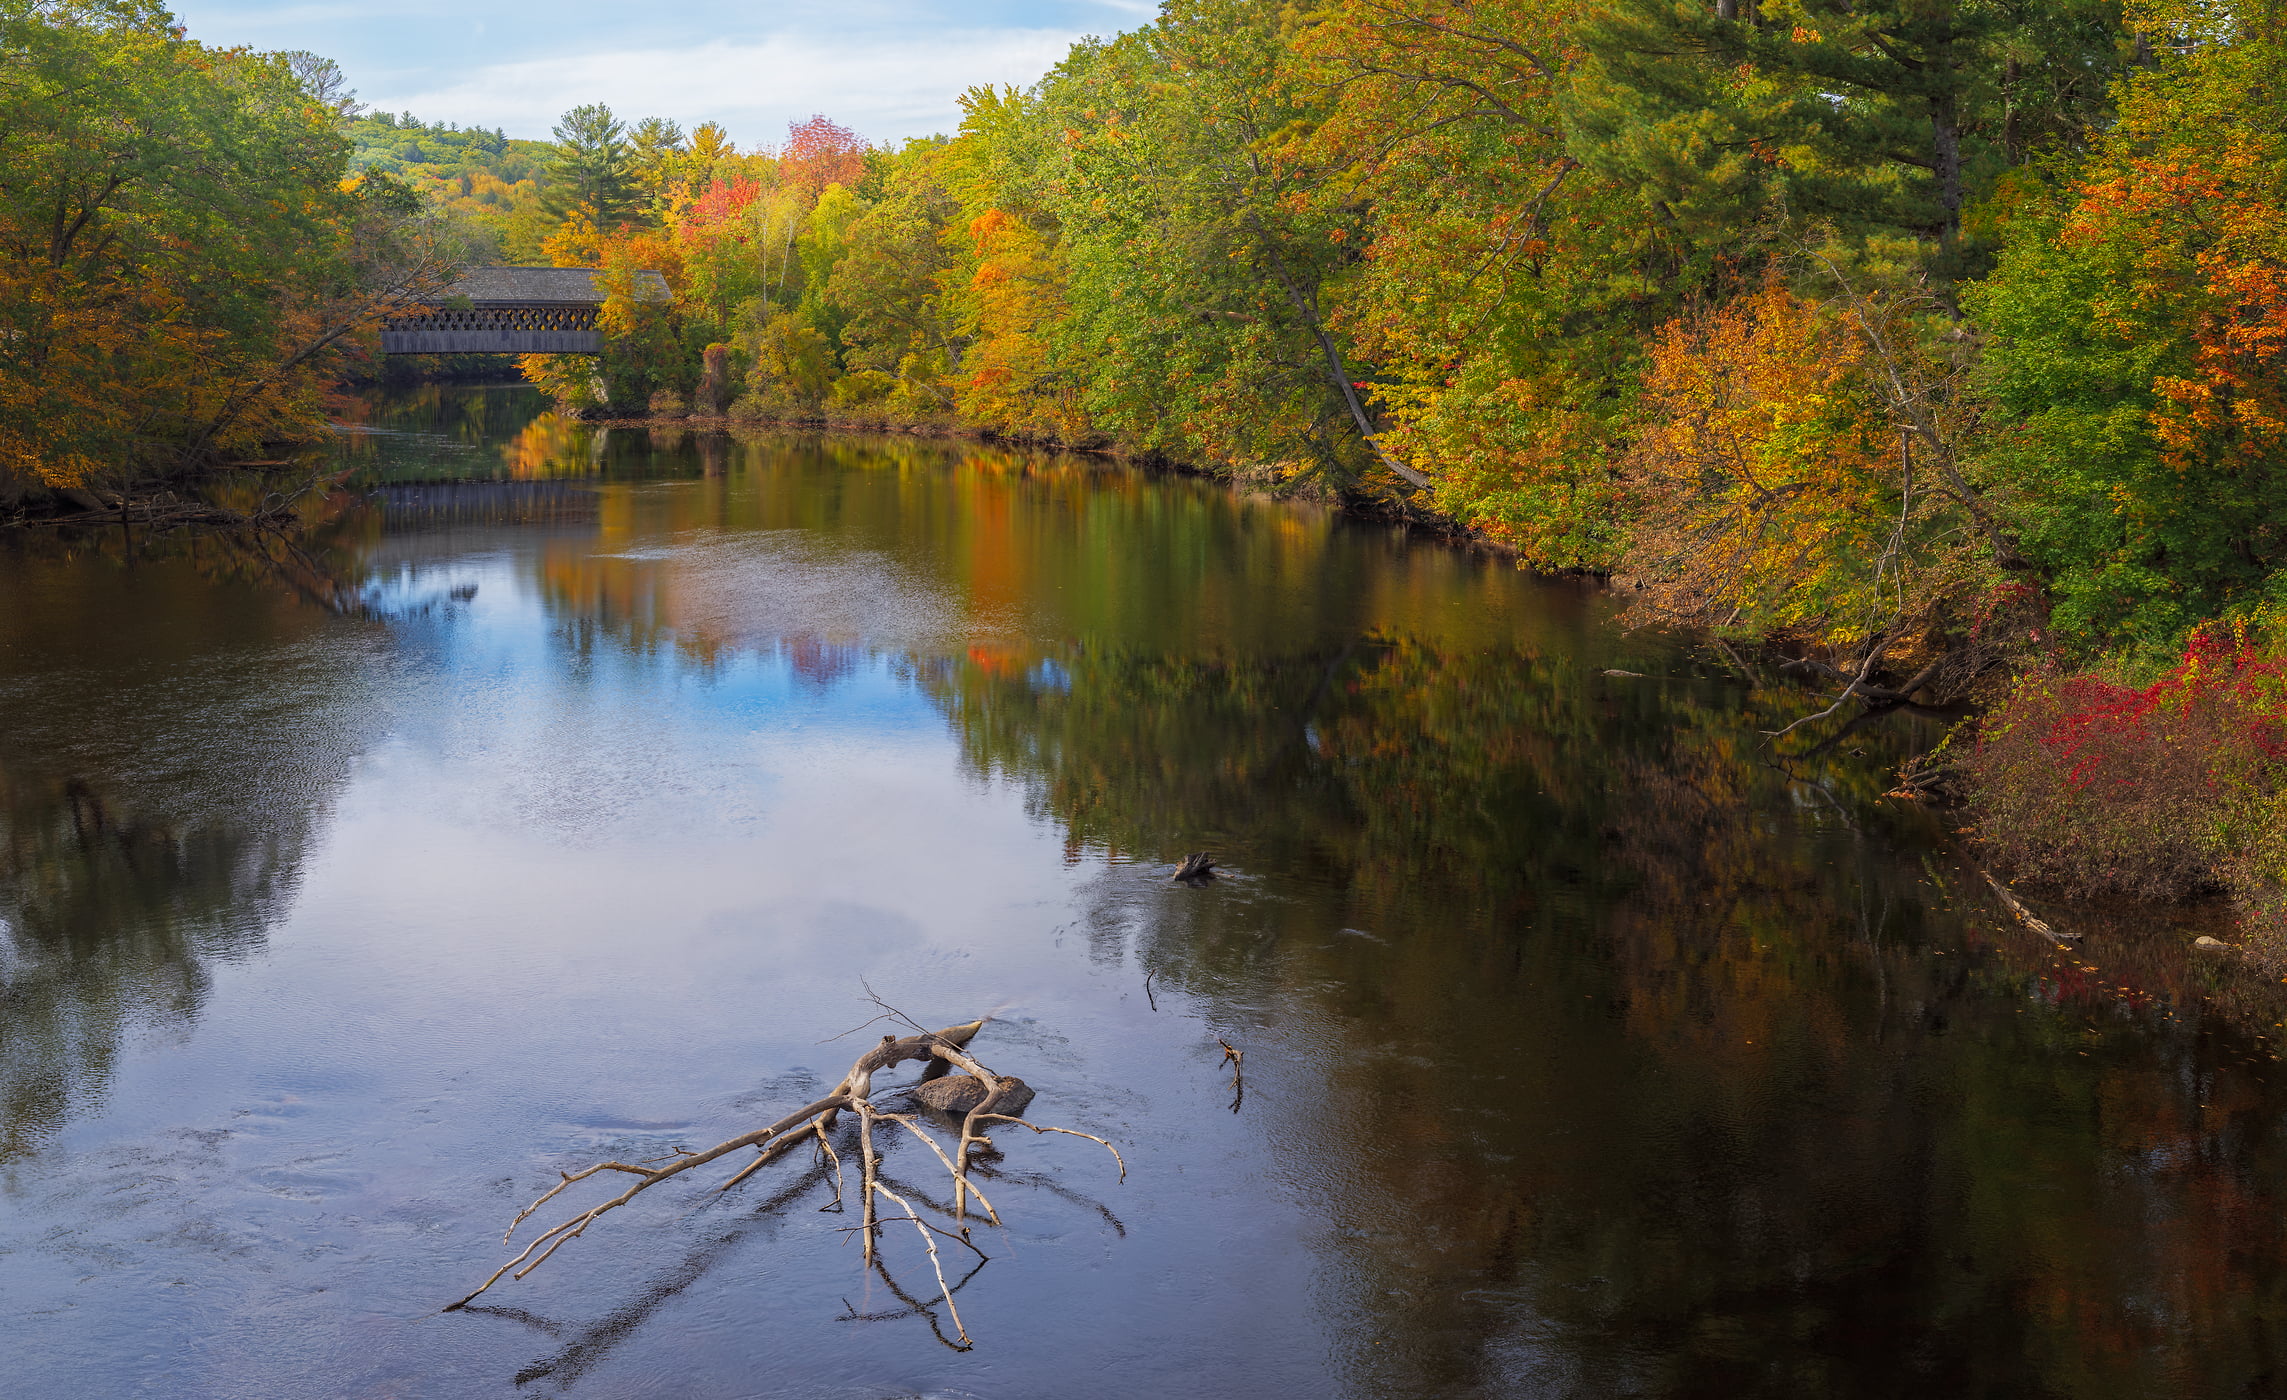 2,286 megapixels! A very high resolution, large-format VAST photo print of a covered bridge in New England in autumn; photograph created by John Freeman in Bridge Street, Henniker, New Hampshire.